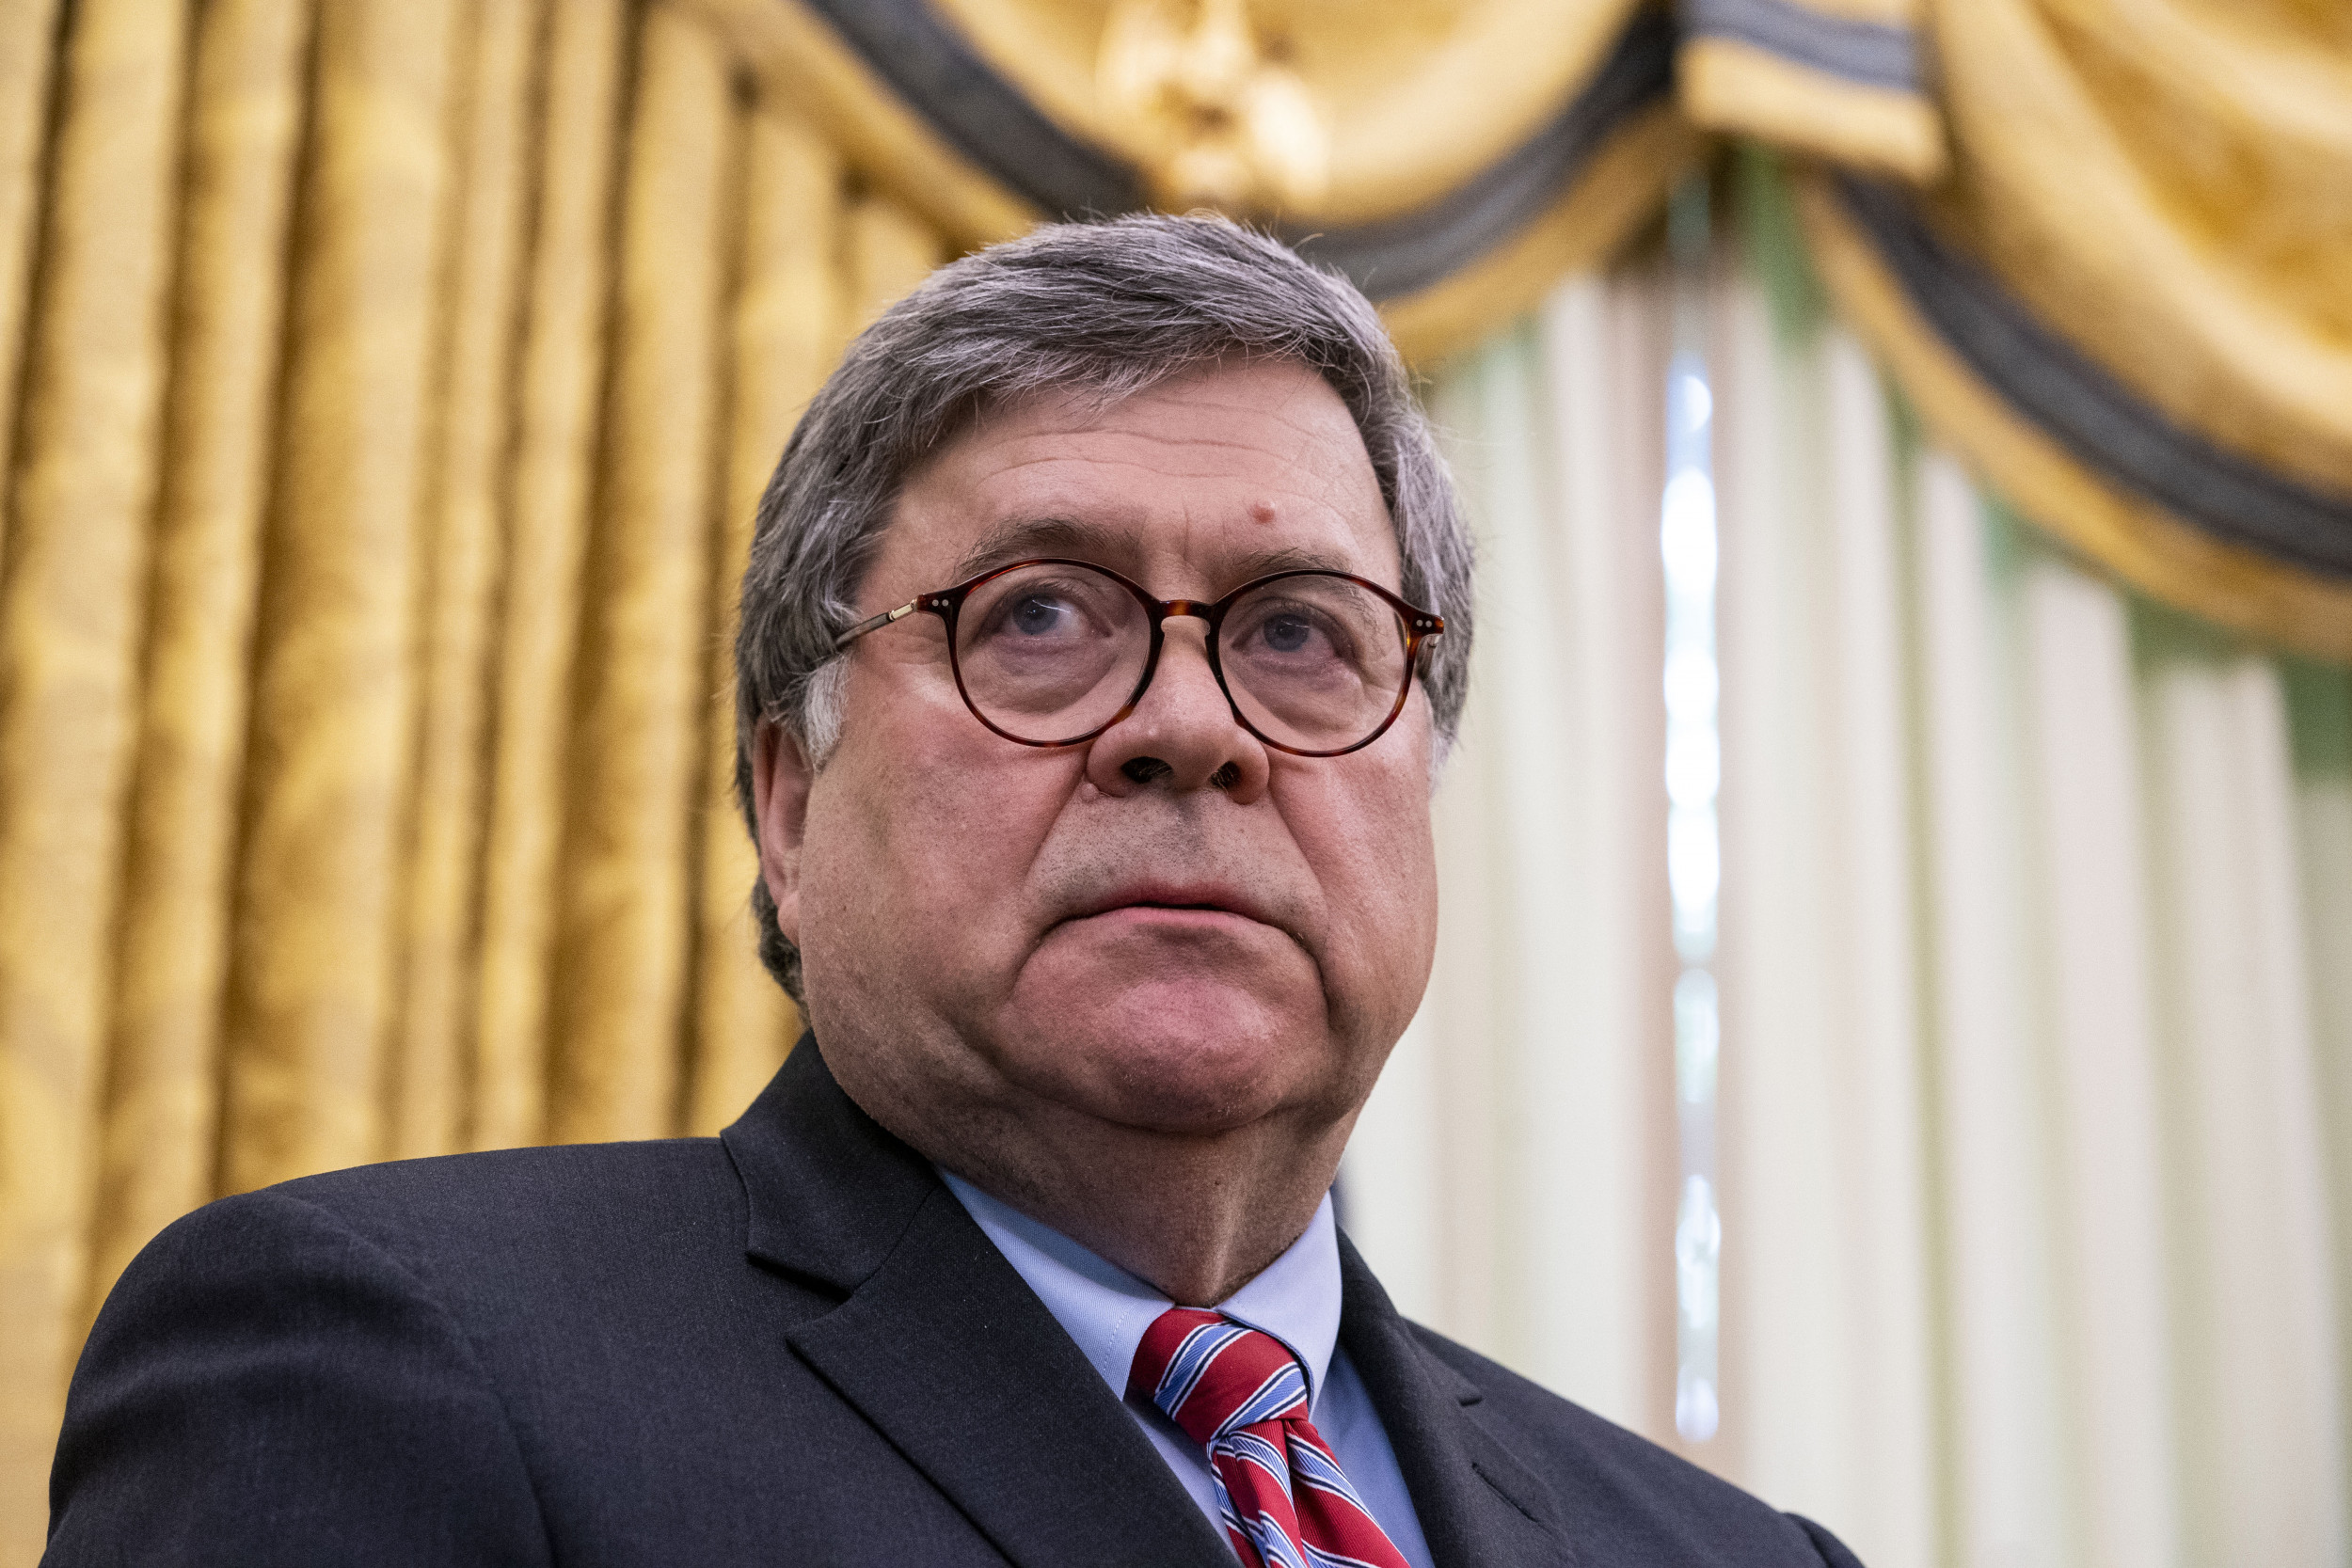 Trump Says AG Barr Has to 'Act Fast' to Uncover Biden's 'Major Corruption' 14 Days Before Election thumbnail